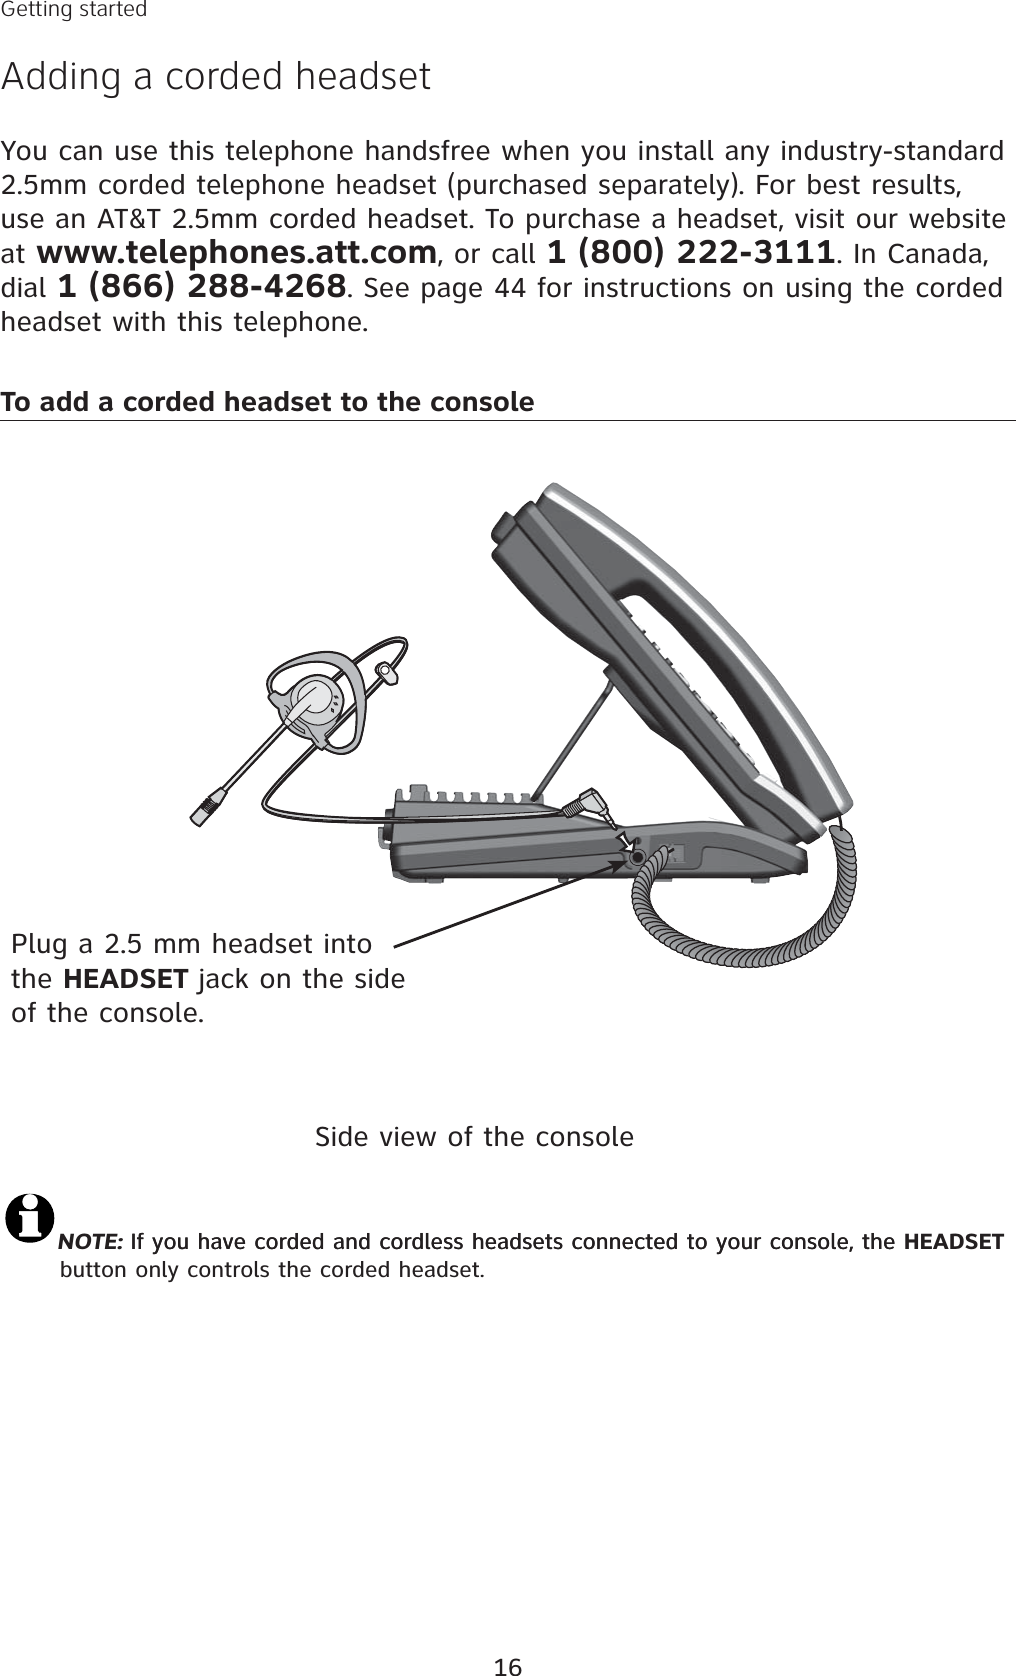 16You can use this telephone handsfree when you install any industry-standard 2.5mm corded telephone headset (purchased separately). For best results, use an AT&amp;T 2.5mm corded headset. To purchase a headset, visit our website at www.telephones.att.com, or call 1 (800) 222-3111. In Canada, dial 1 (866) 288-4268. See page 44 for instructions on using the corded headset with this telephone. Plug a 2.5 mm headset into the HEADSET jack on the side of the console.Side view of the consoleNOTE: If you have corded and cordless headsets connected to your console, theIf you have corded and cordless headsets connected to your console, the HEADSETbutton only controls the corded headset. To add a corded headset to the consoleGetting startedAdding a corded headset